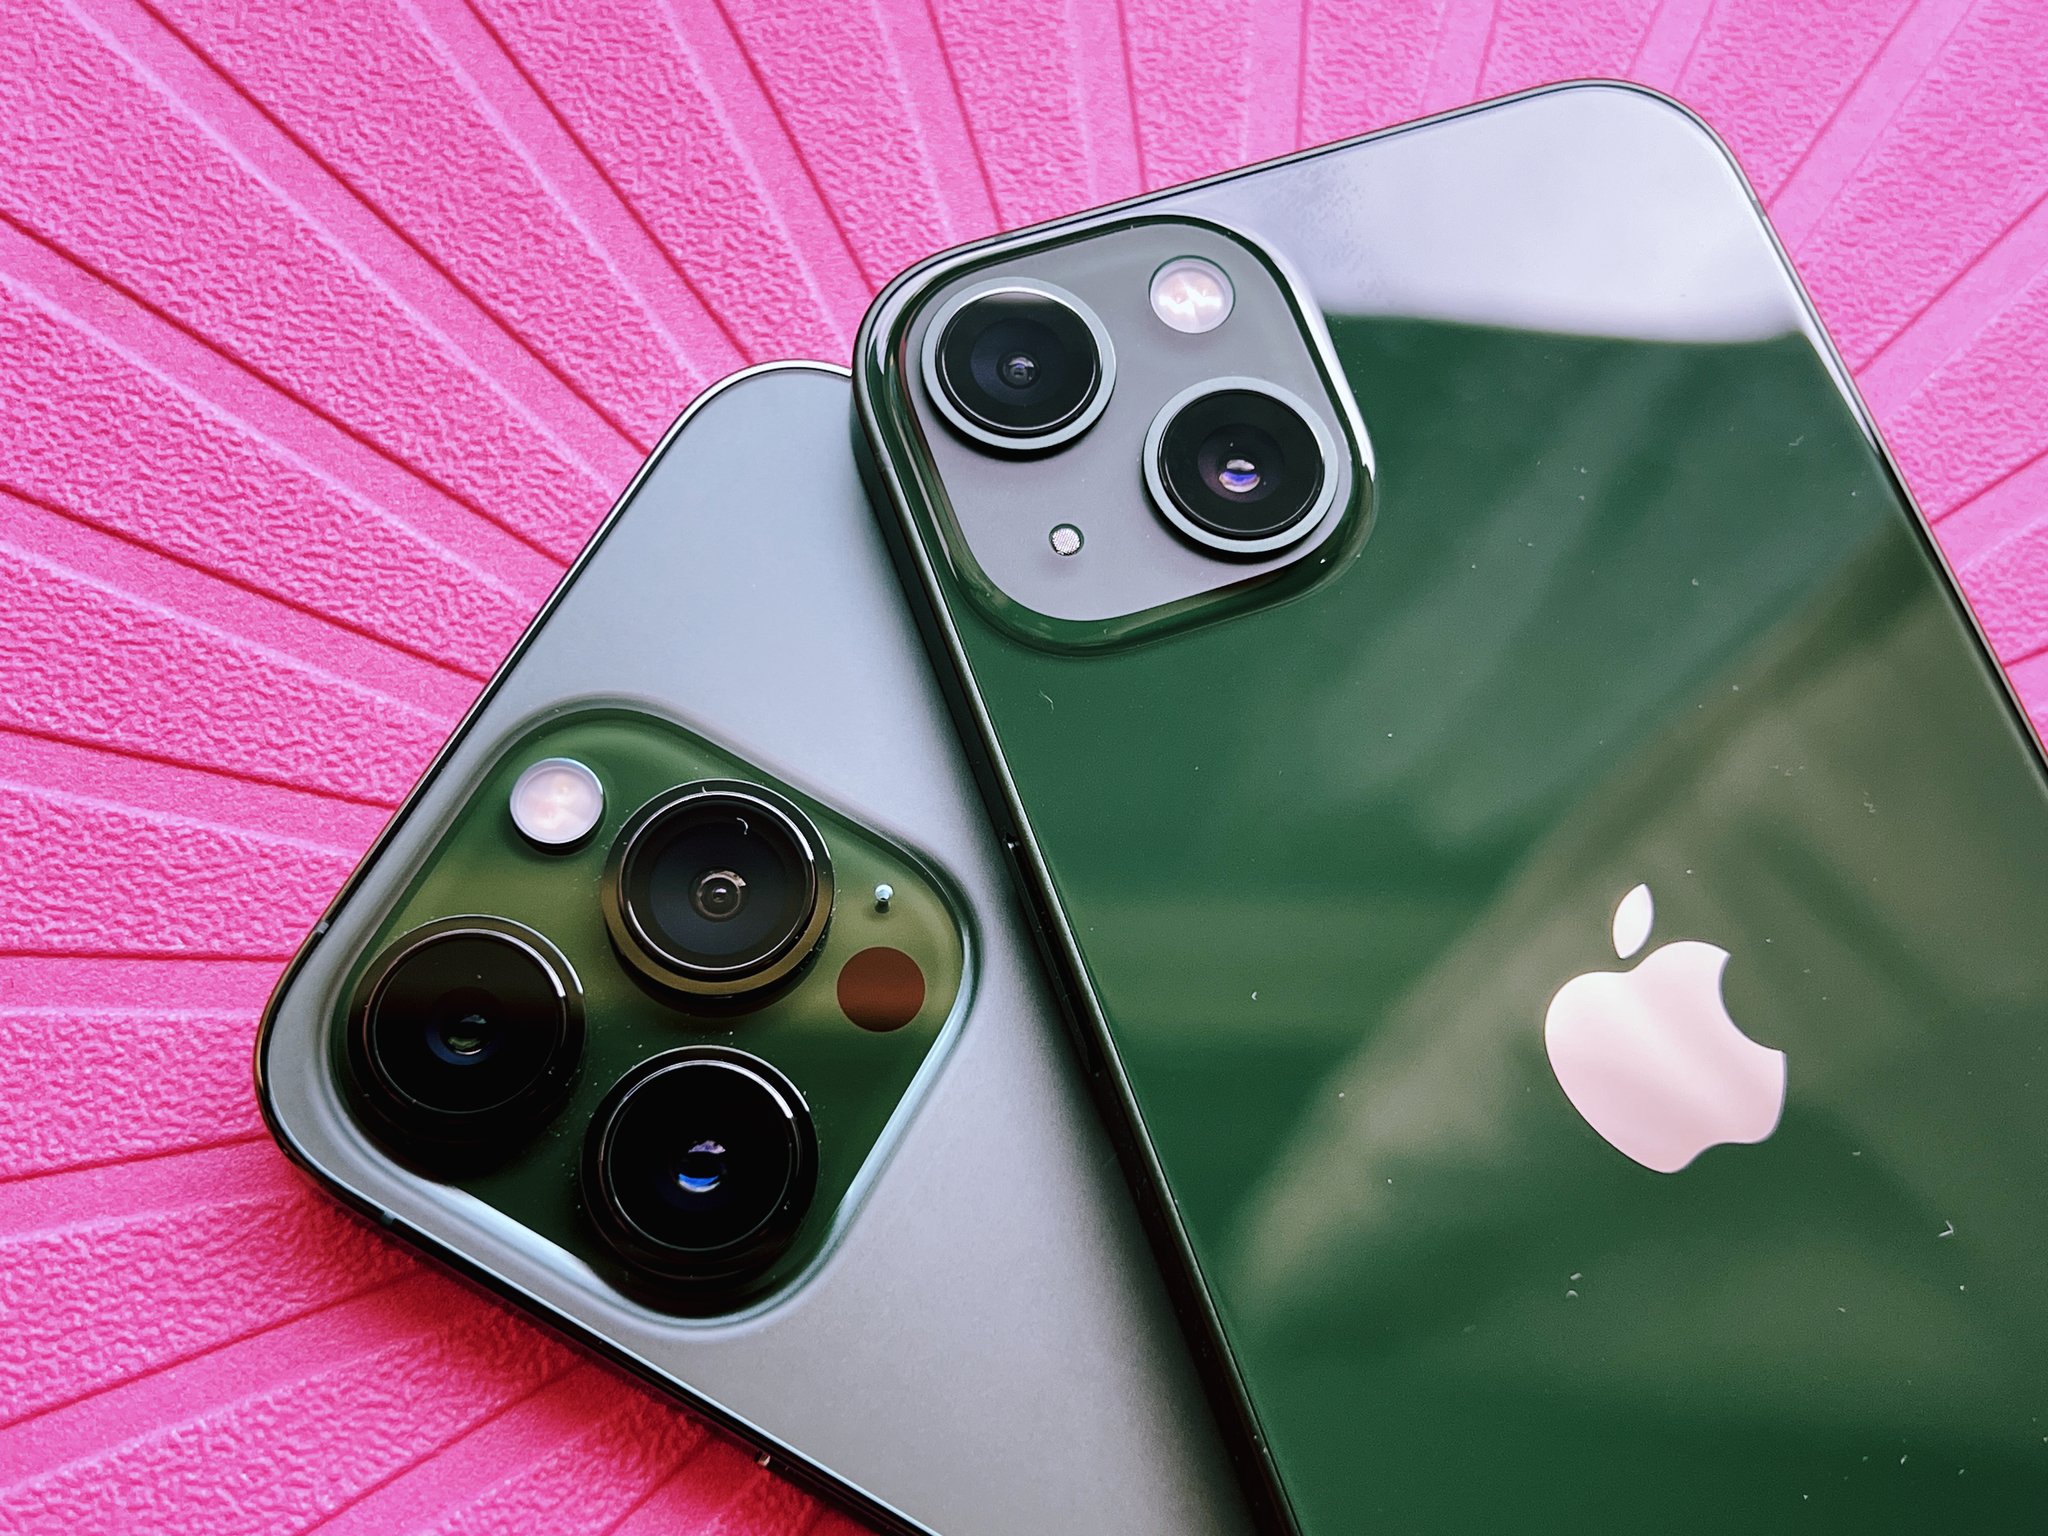 Green iPhone 13 and Alpine Green iPhone 13 Pro cameras